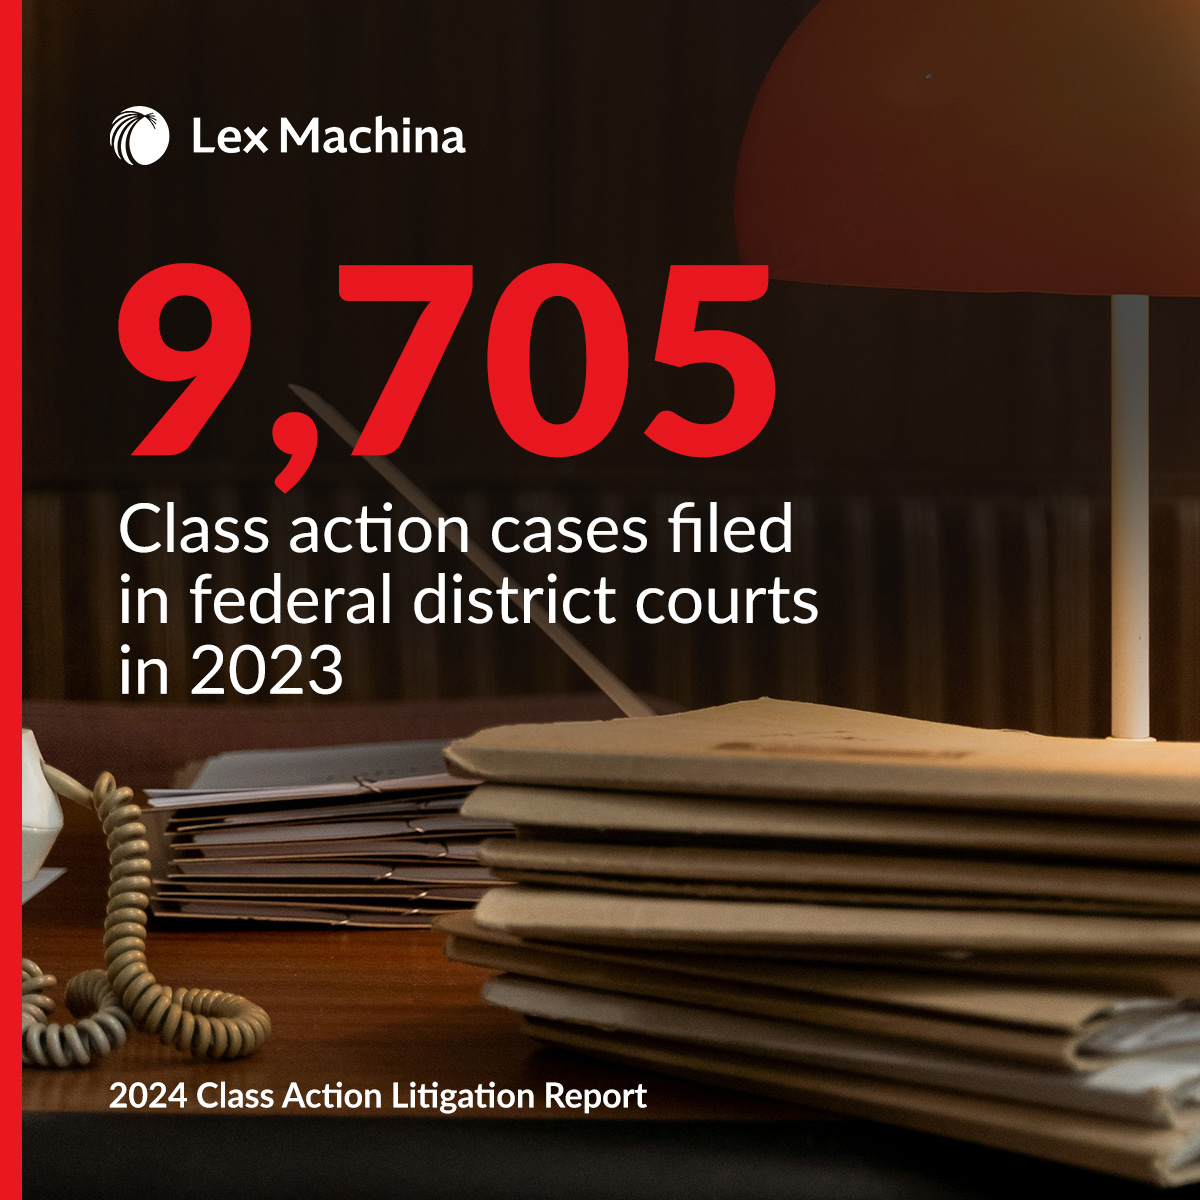 The latest @LexMachina Class Action Litigation Report is out now! With 9,705 class action cases filed in federal district courts, it's a must-read for legal professionals at firms and organizations big and small. Get your copy today! bit.ly/4b69zFX